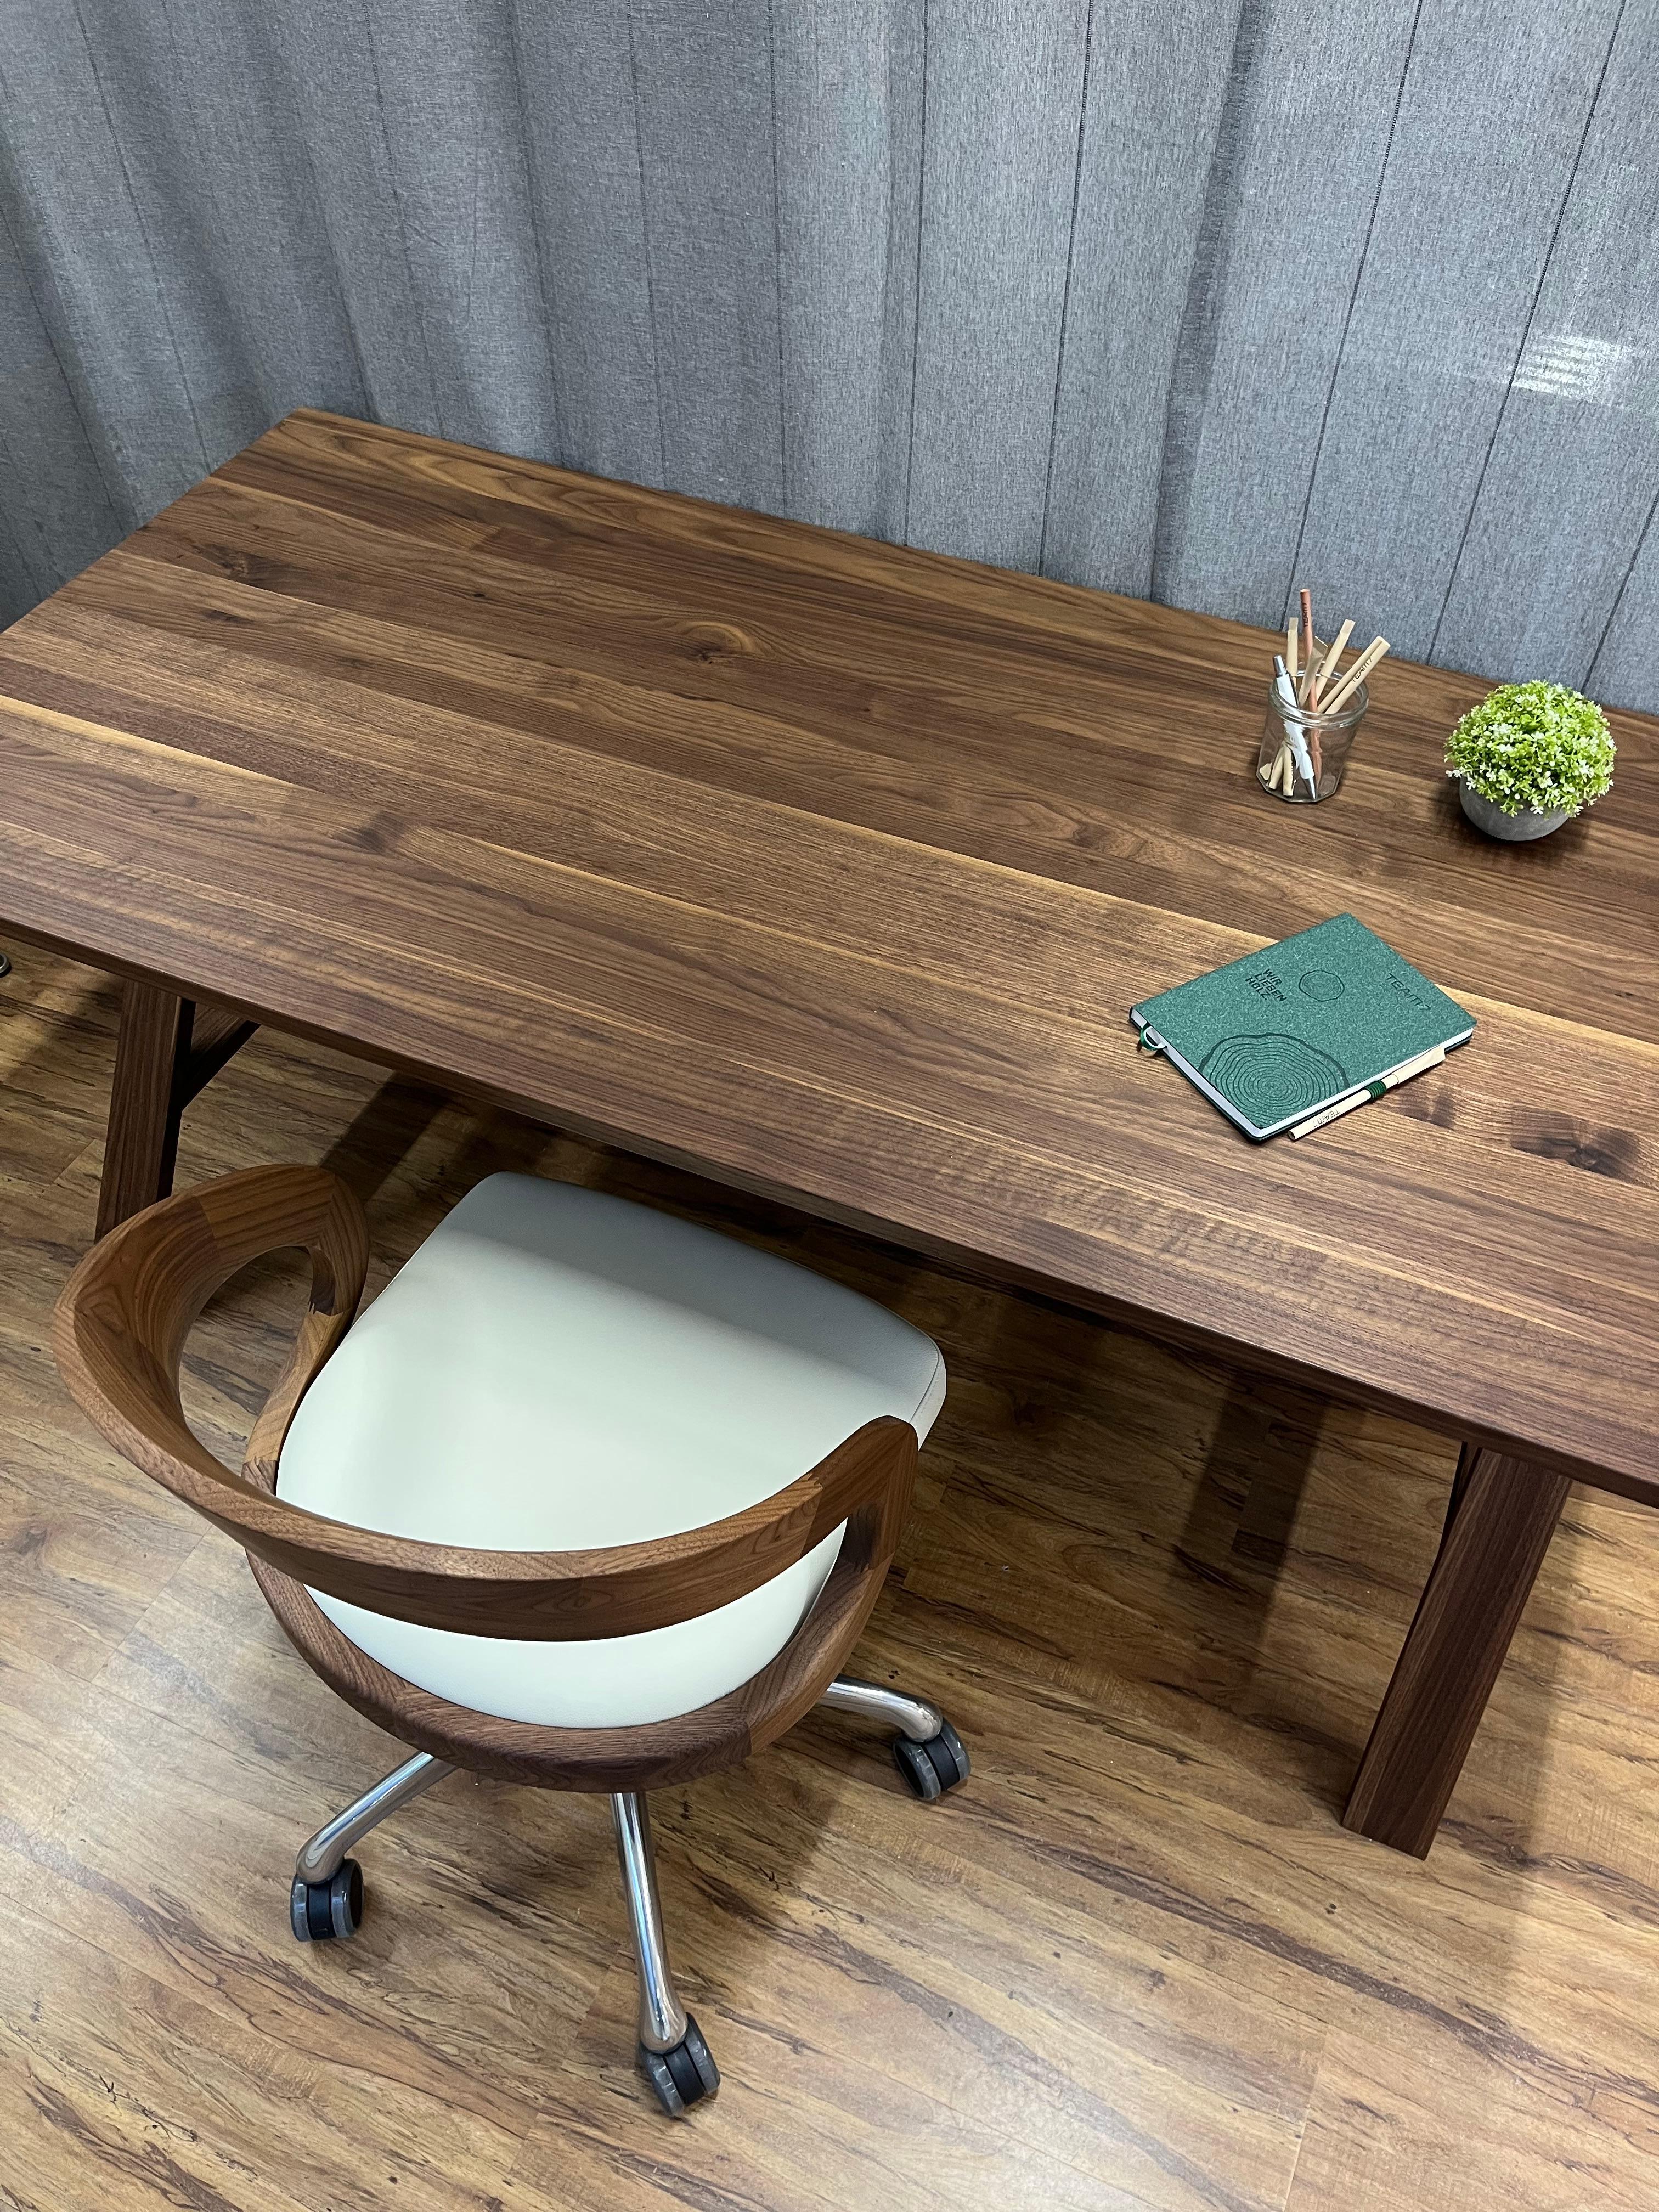 This height-adjustable solid wood walnut desk enables an ergonomic working position for people of every size. The desk height ranges from 26.75in to 31.88in, in increments of 1.25in to enable adjustment to find the perfect height, step by step. It